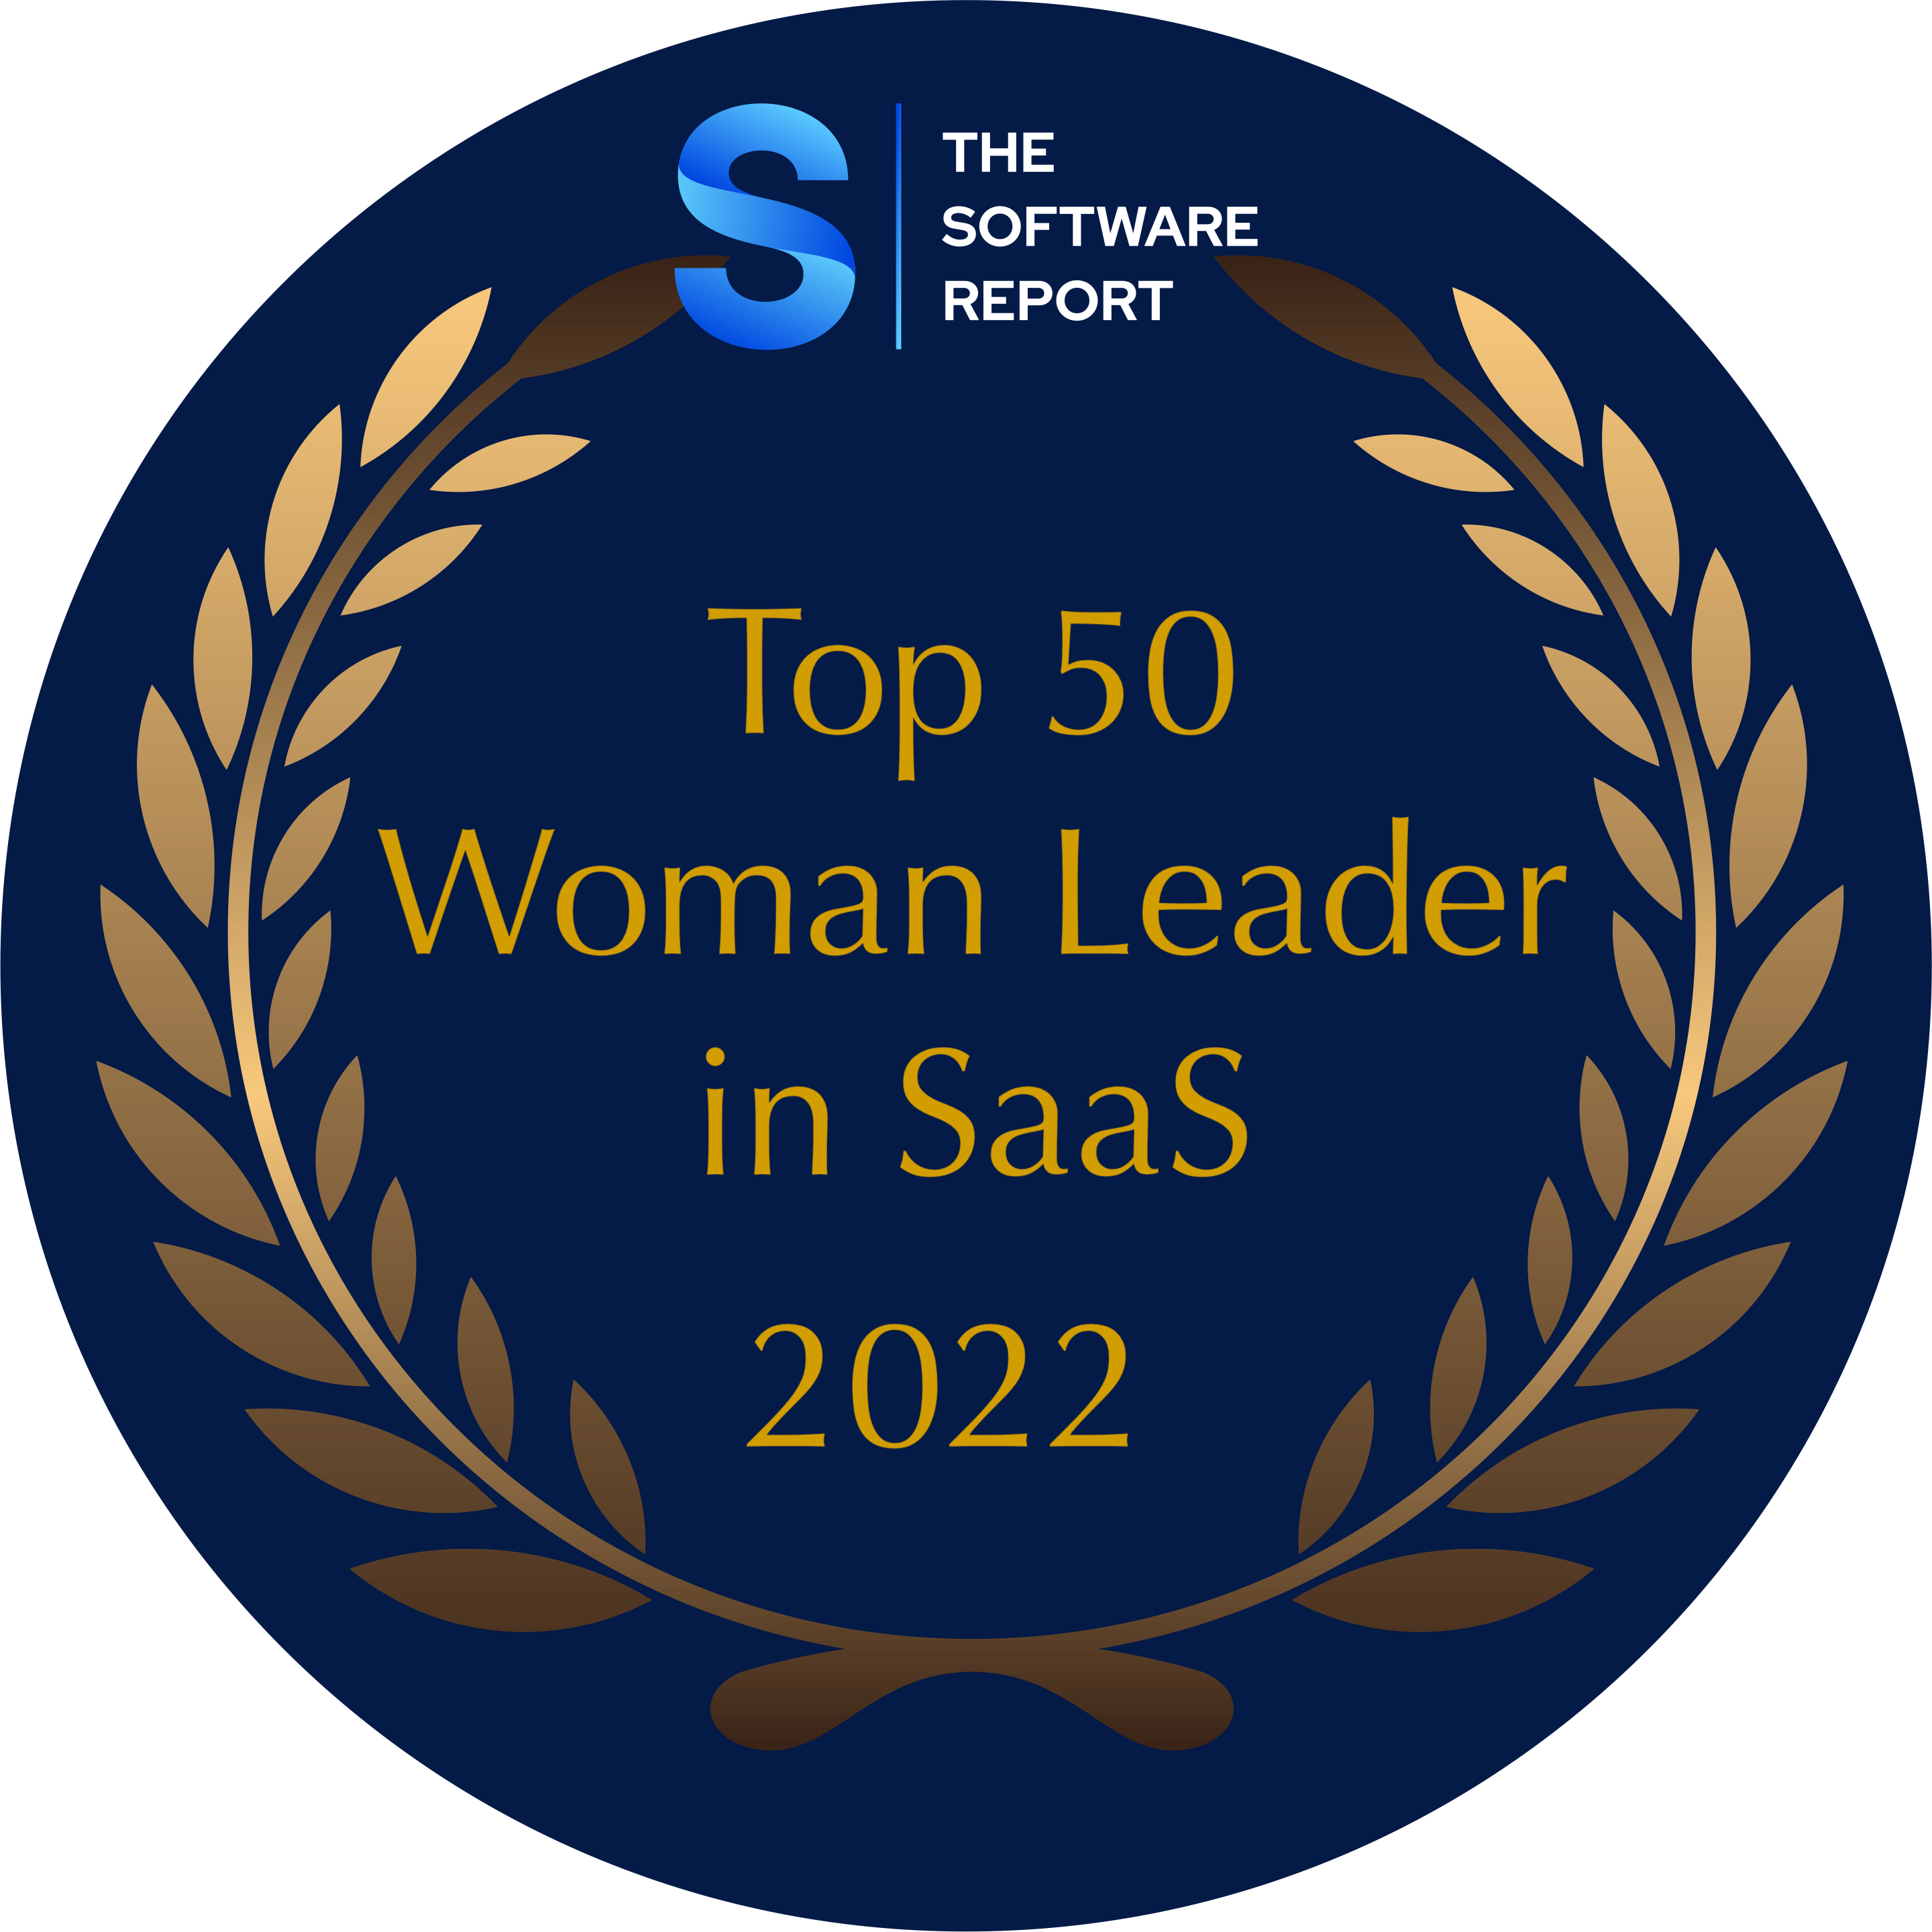 Clara Canevari of Speexx Named One of The Top 50 Women Leaders in SaaS of 2022 by the Software Report